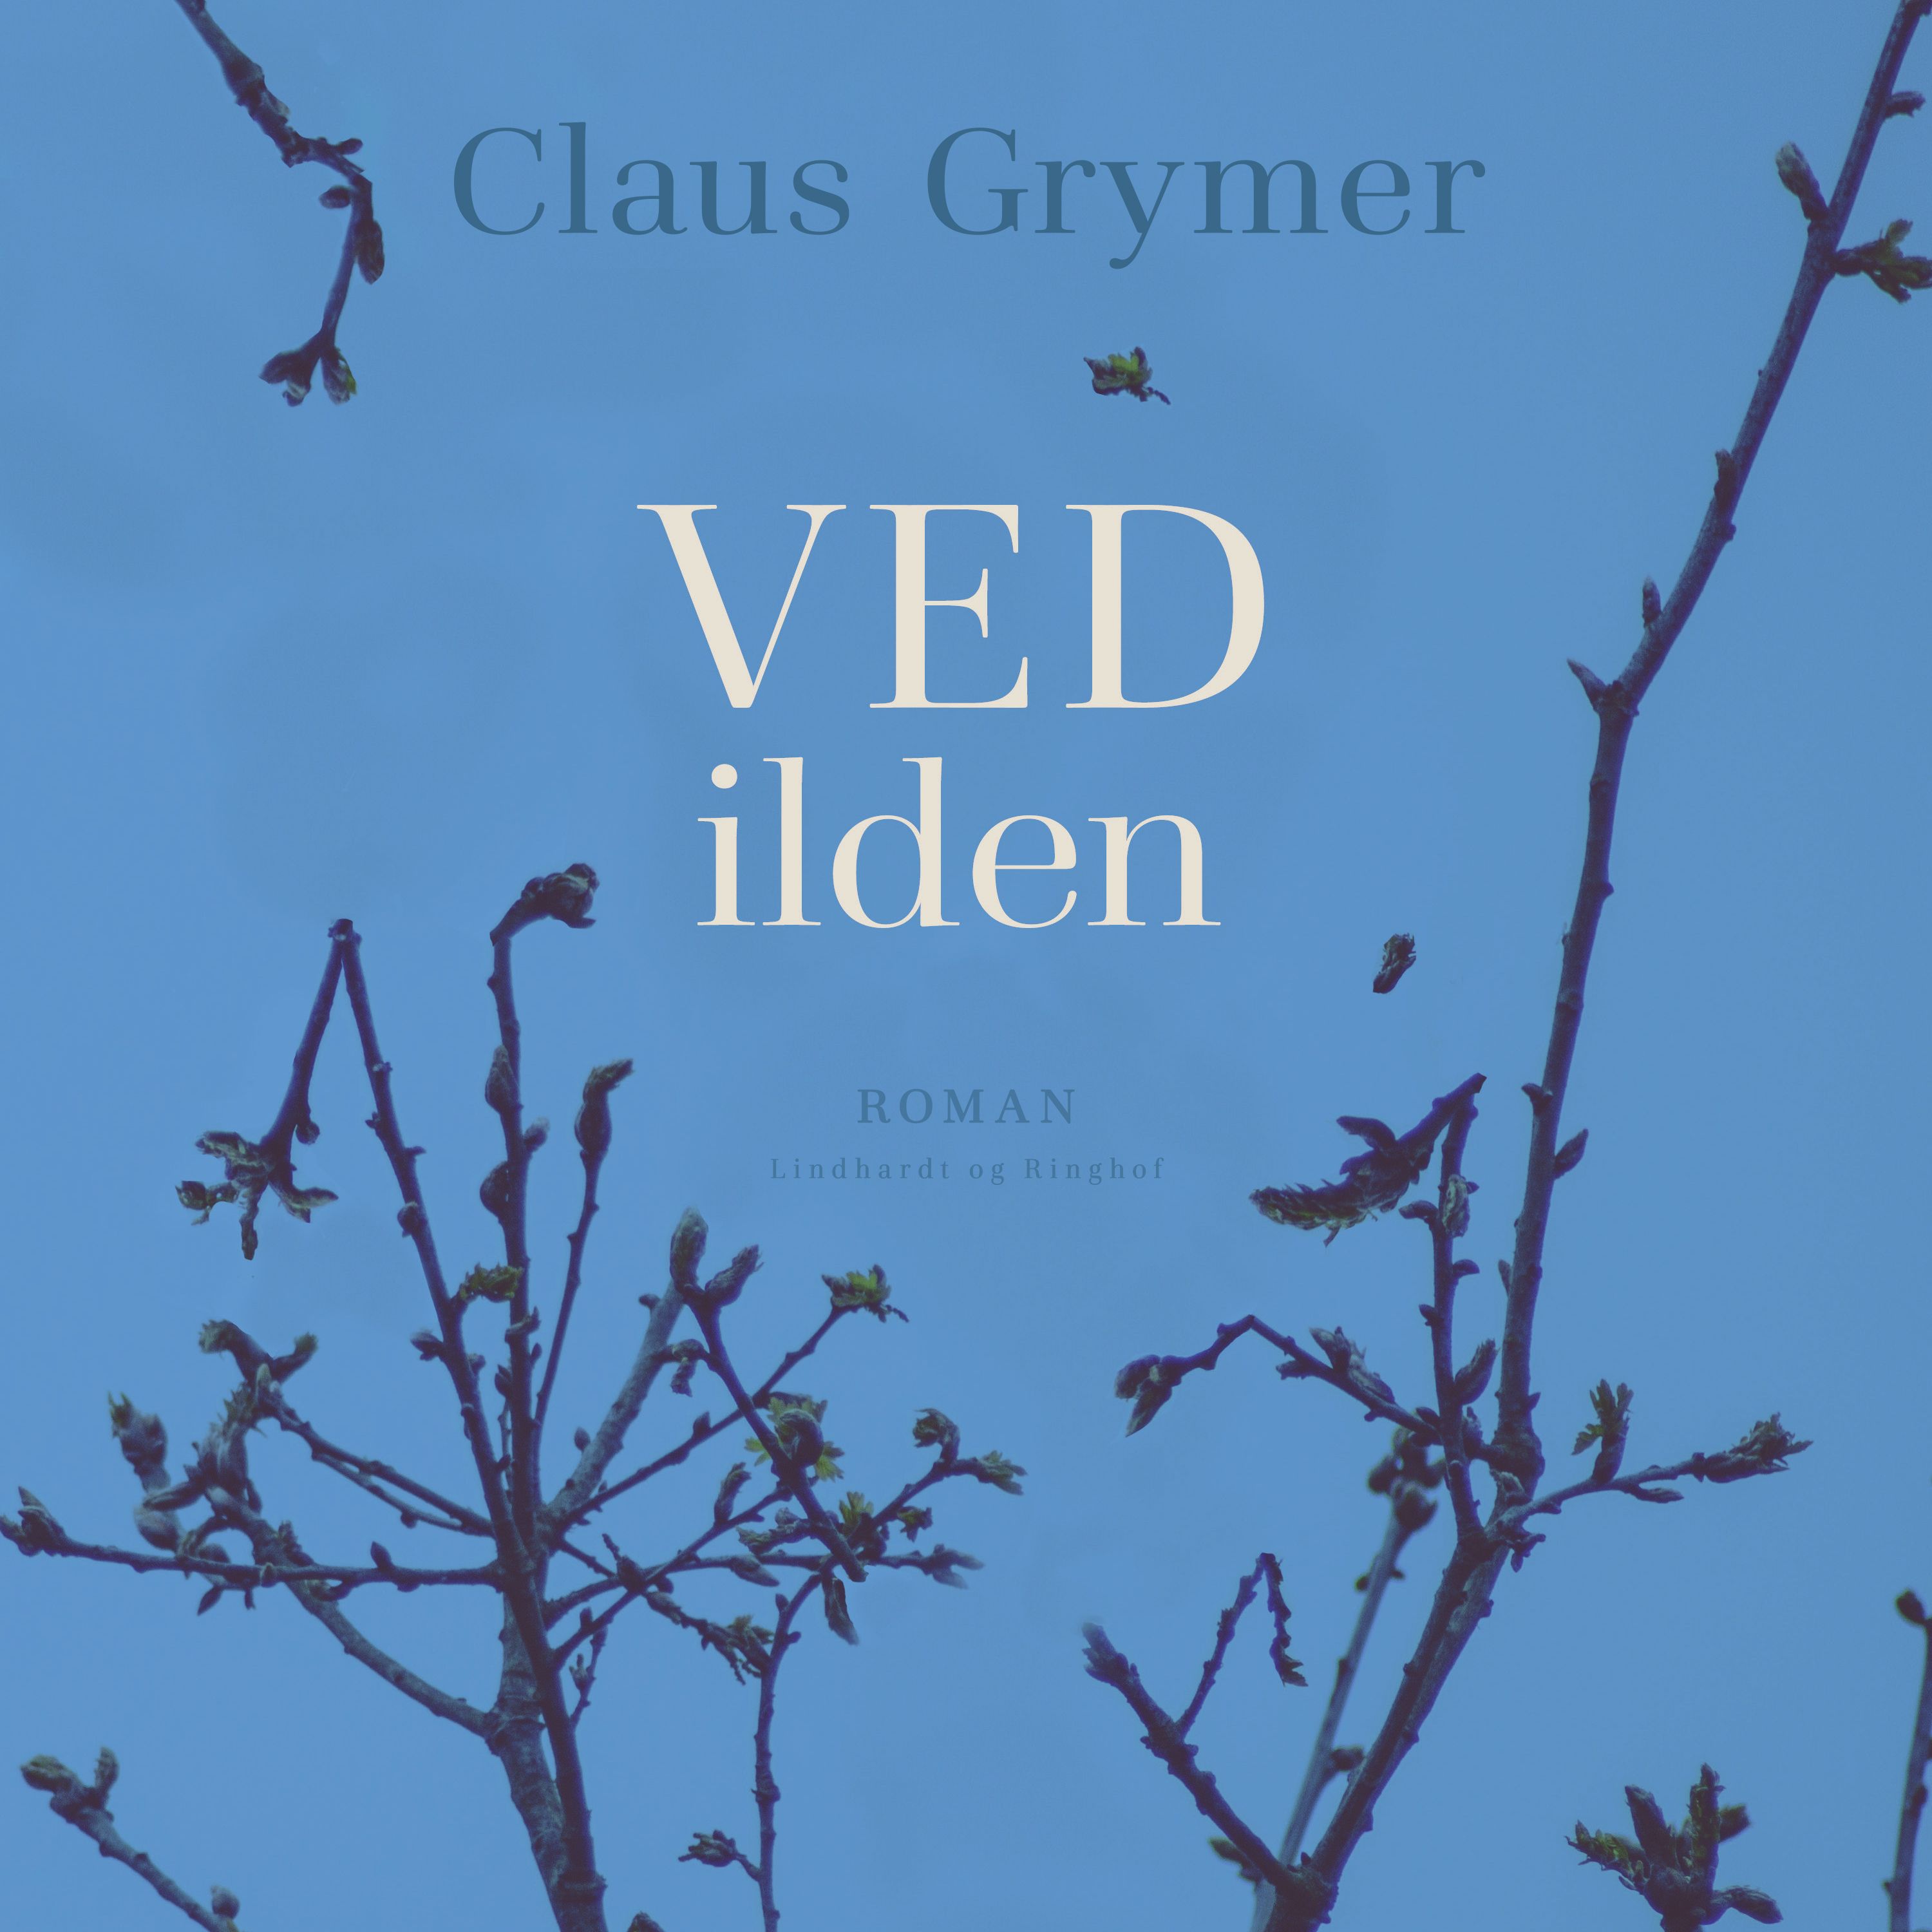 Ved ilden, audiobook by Claus Grymer